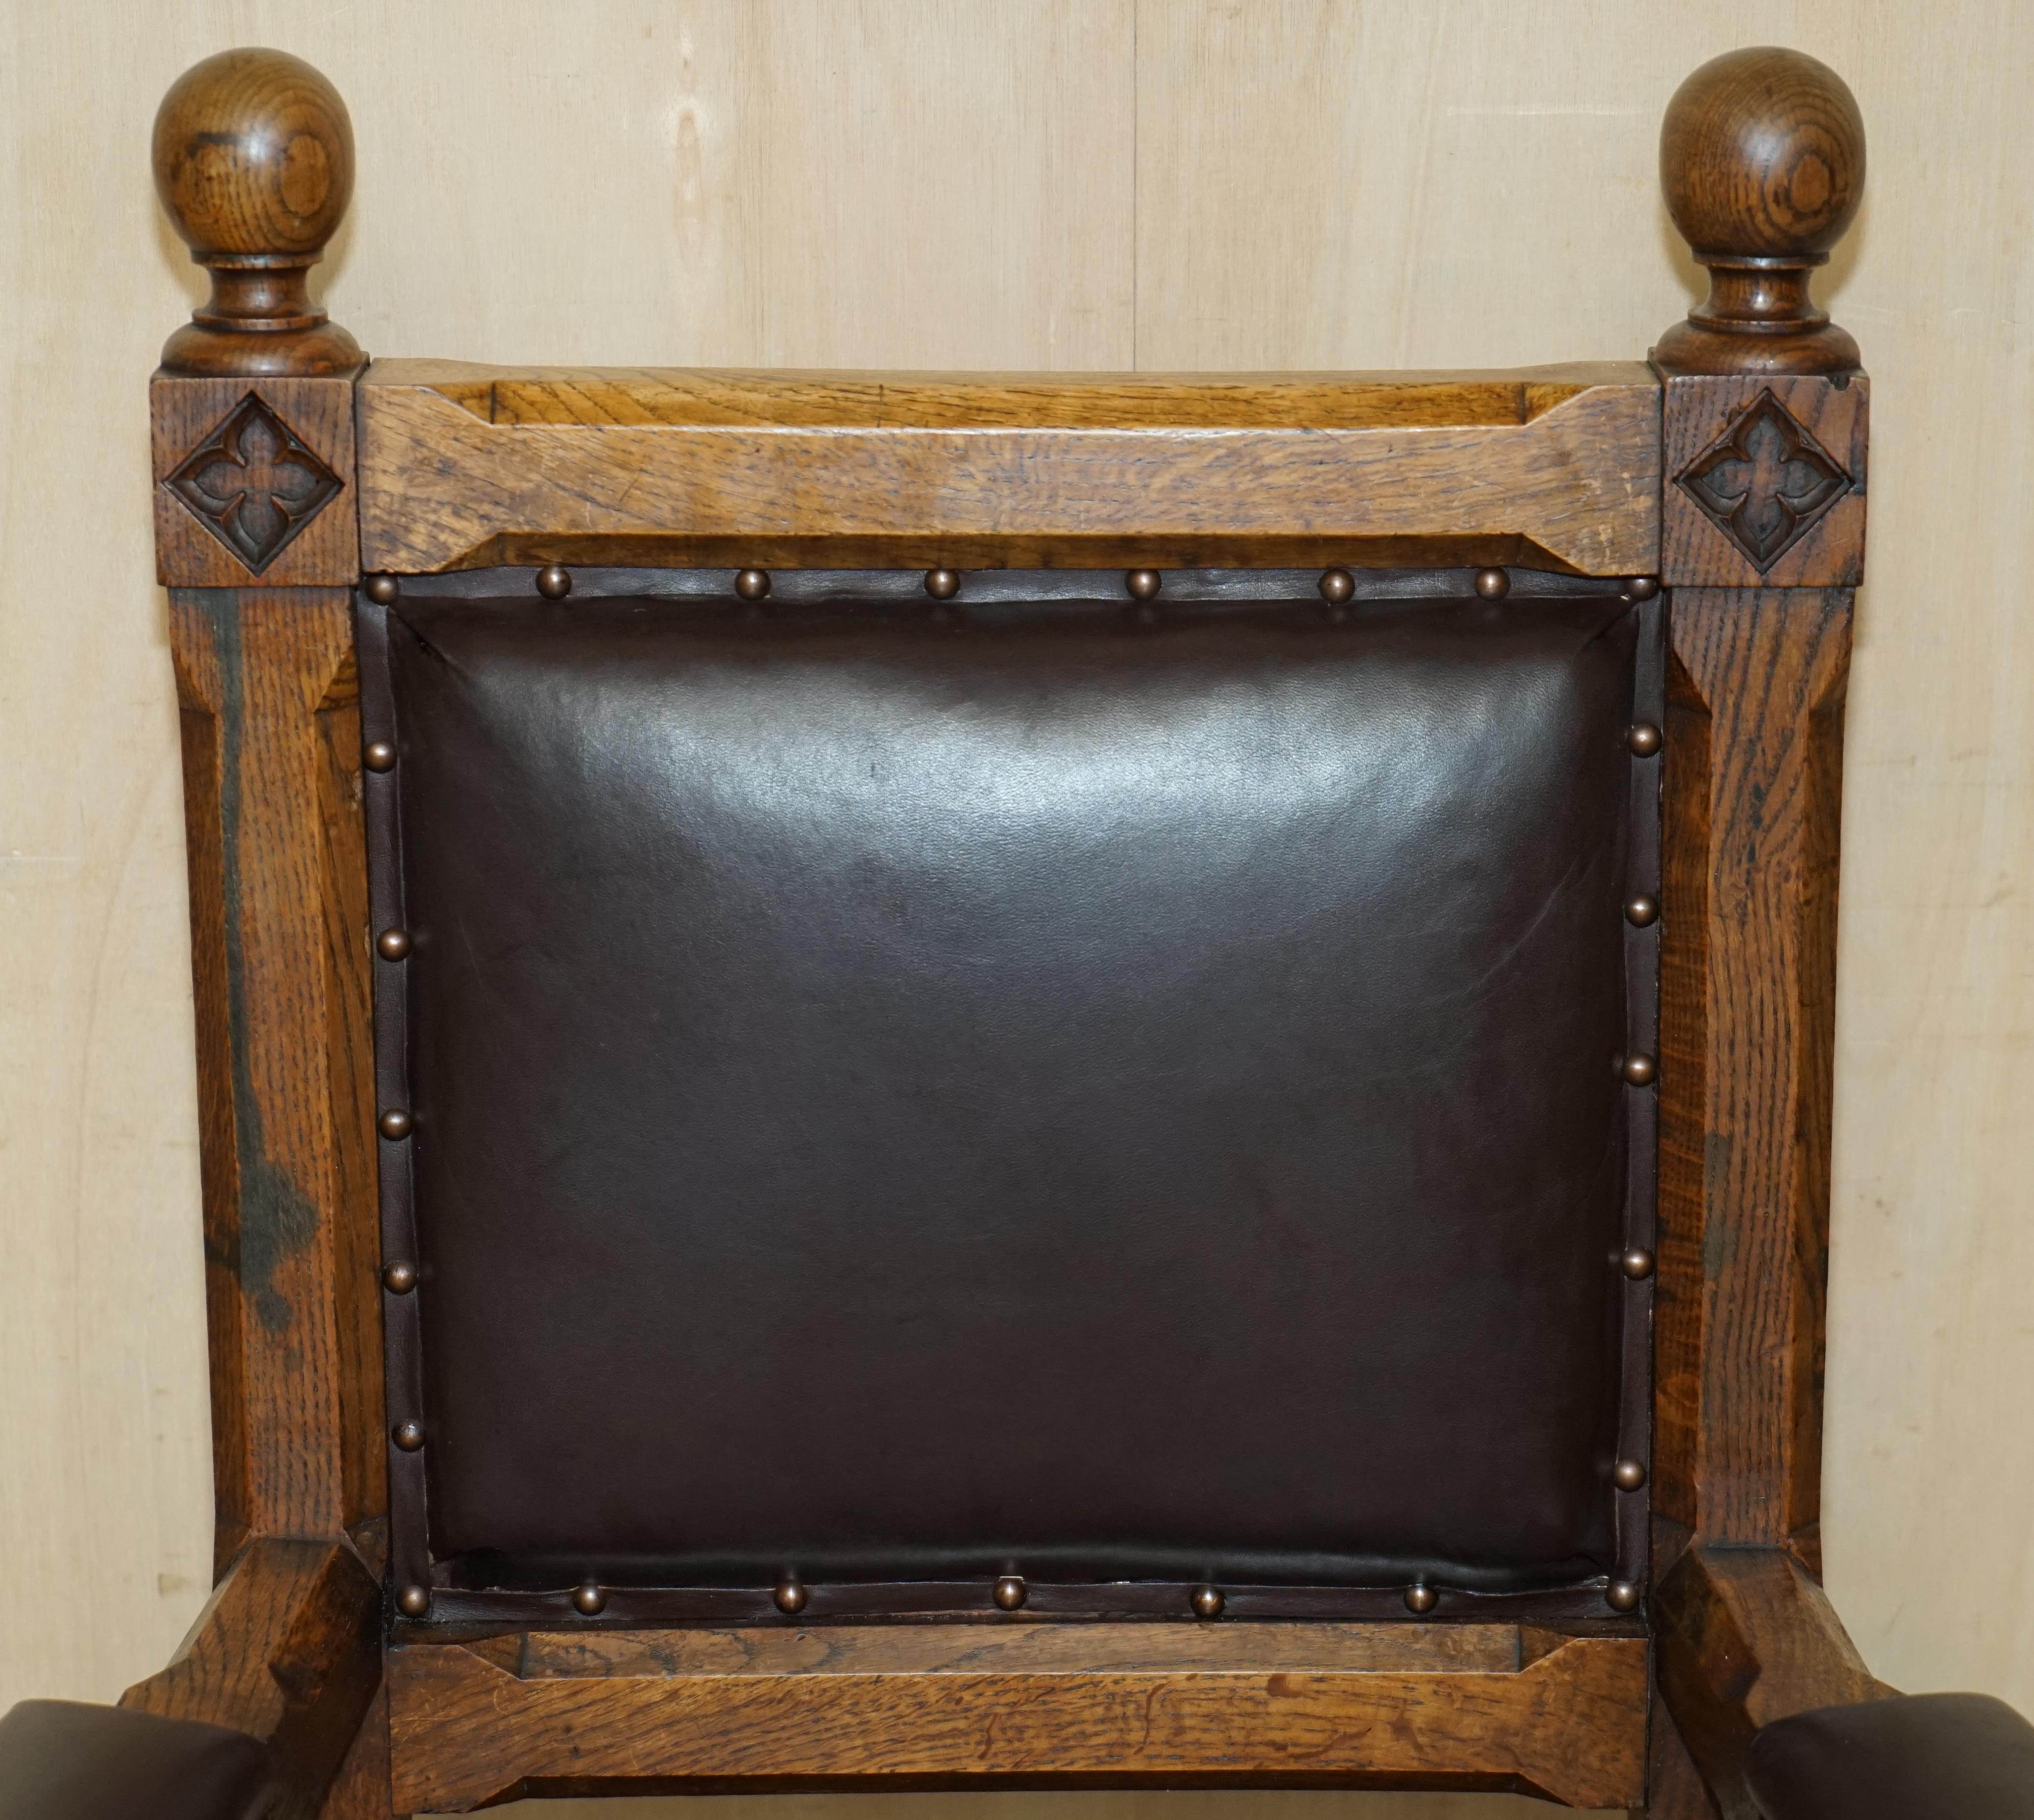 Gothic Revival STUNNING ANTIQUE CIRCA 1880 GOTHIC REViVAL OAK PUGIN STYLE CARVER ARMCHAIR For Sale